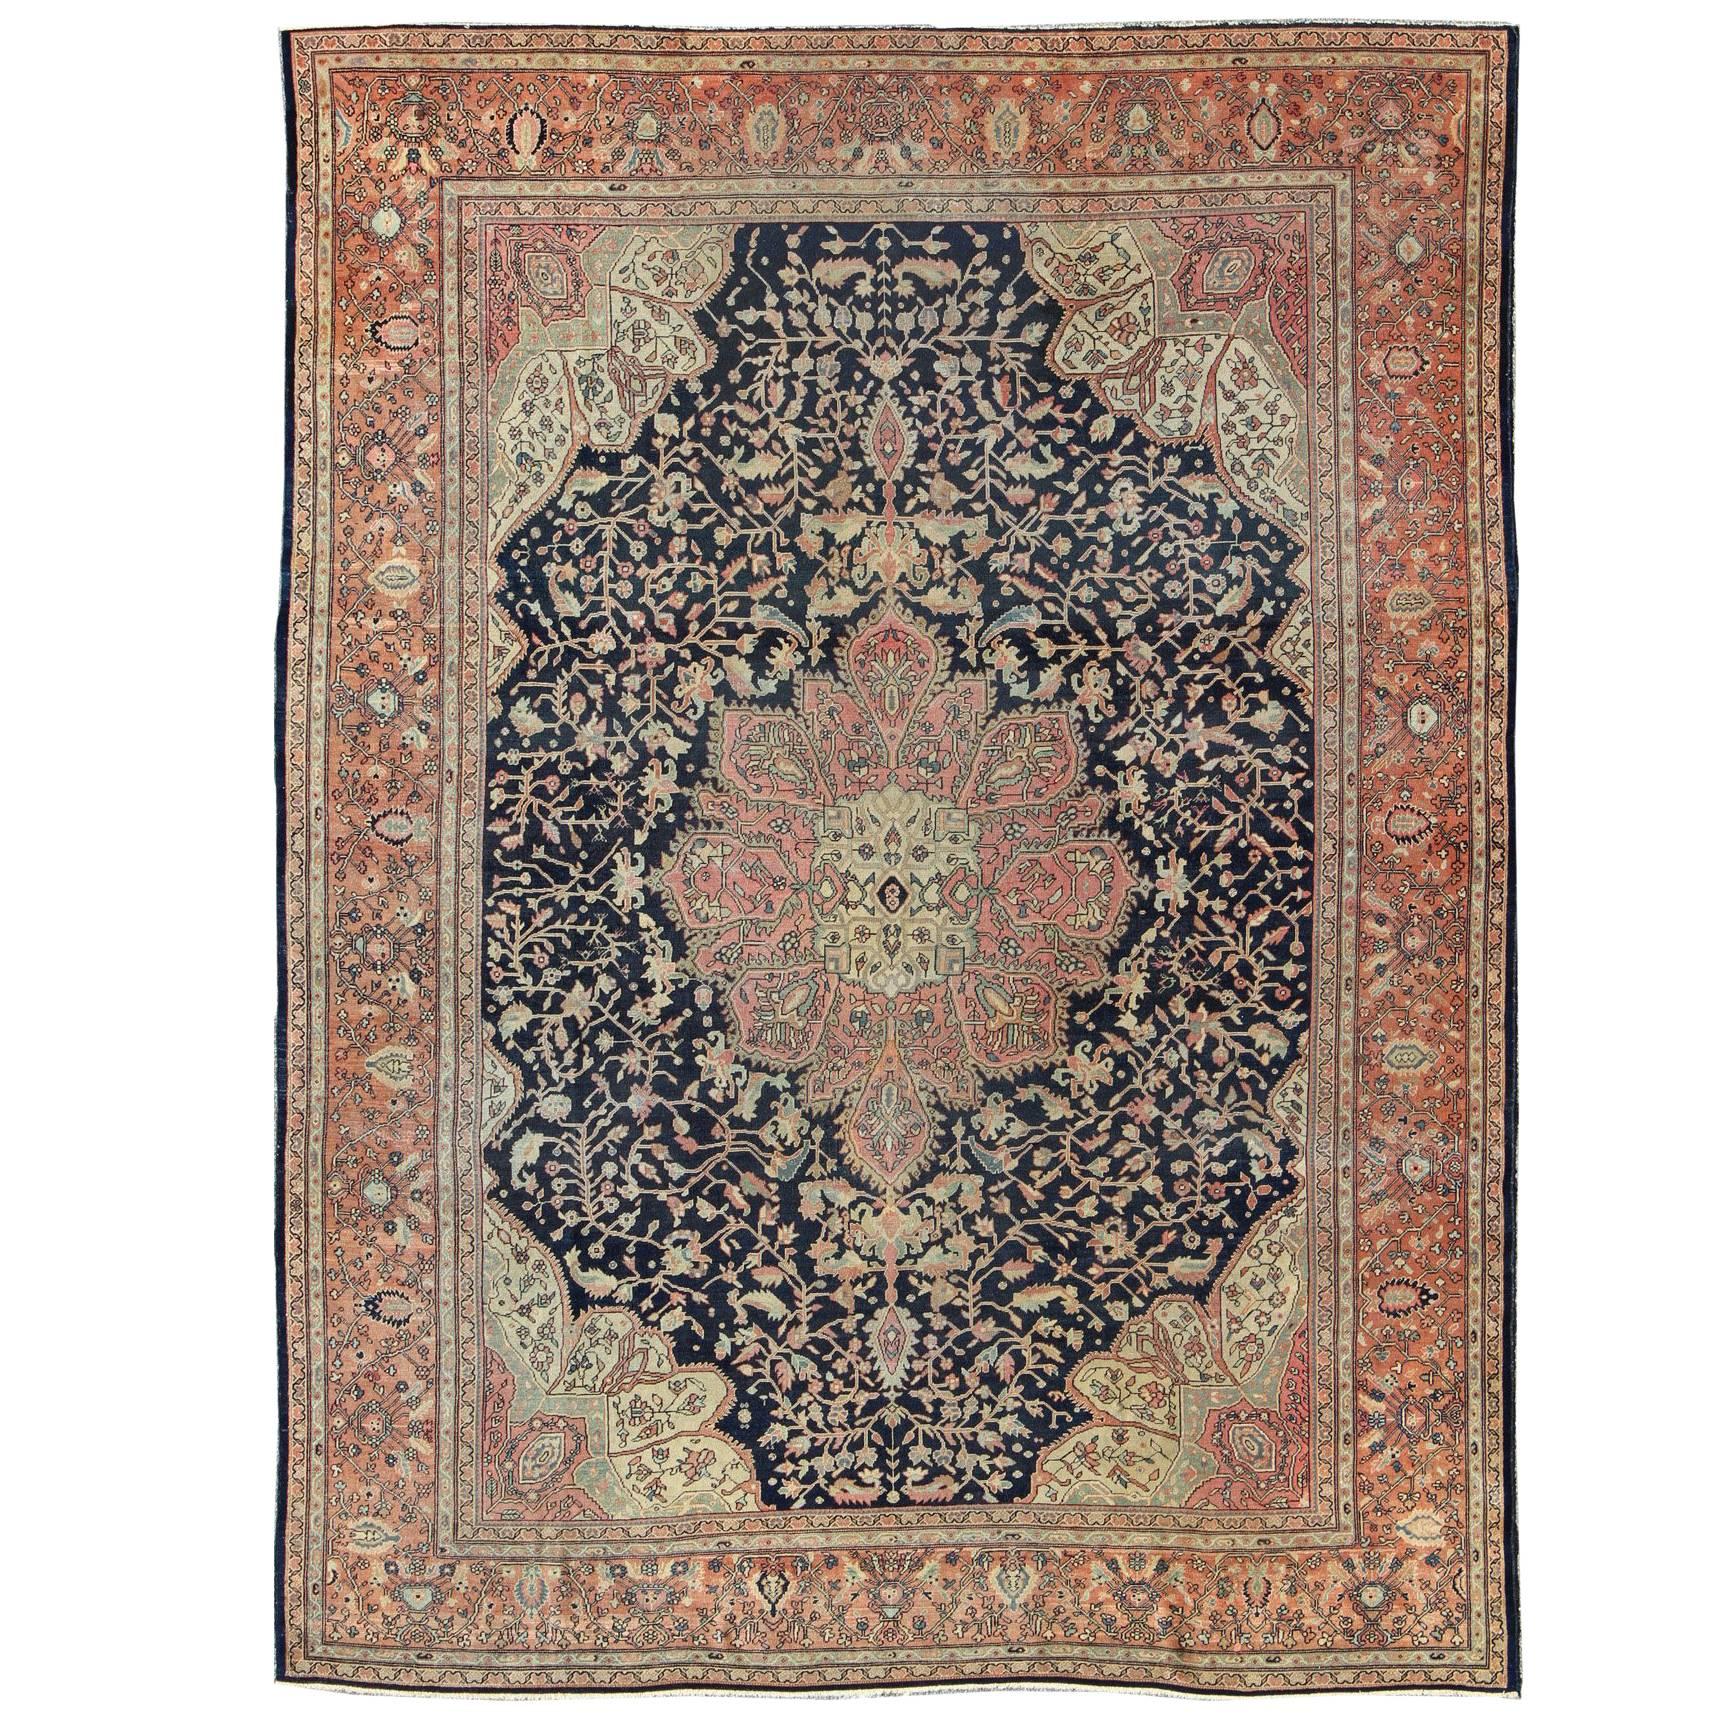 Antique Sarouk Farahan with Floral Motifs in Salmon, Green, Beige and Navy Blue For Sale